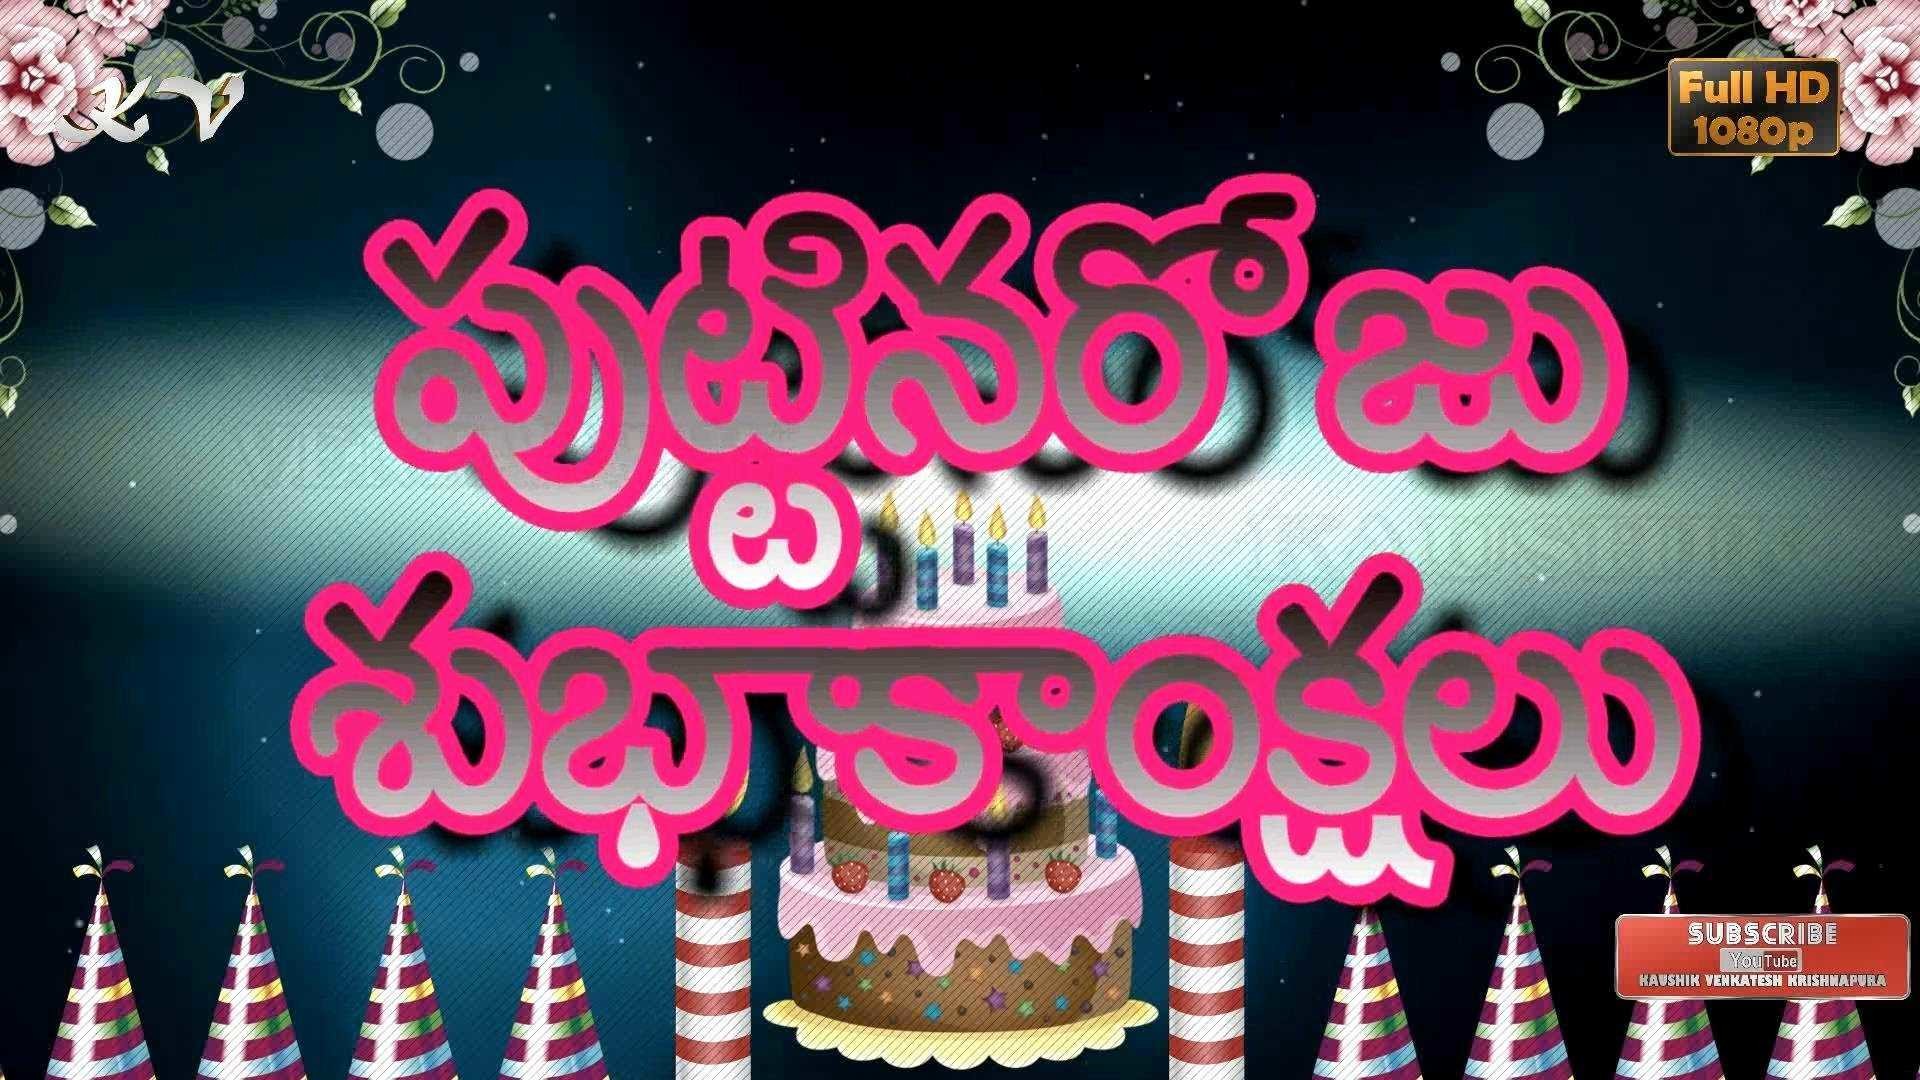 Happy Birthday Cake And Candles Wallpaper Hd Wallpaper - Happy Birthday Mounika Telugu , HD Wallpaper & Backgrounds